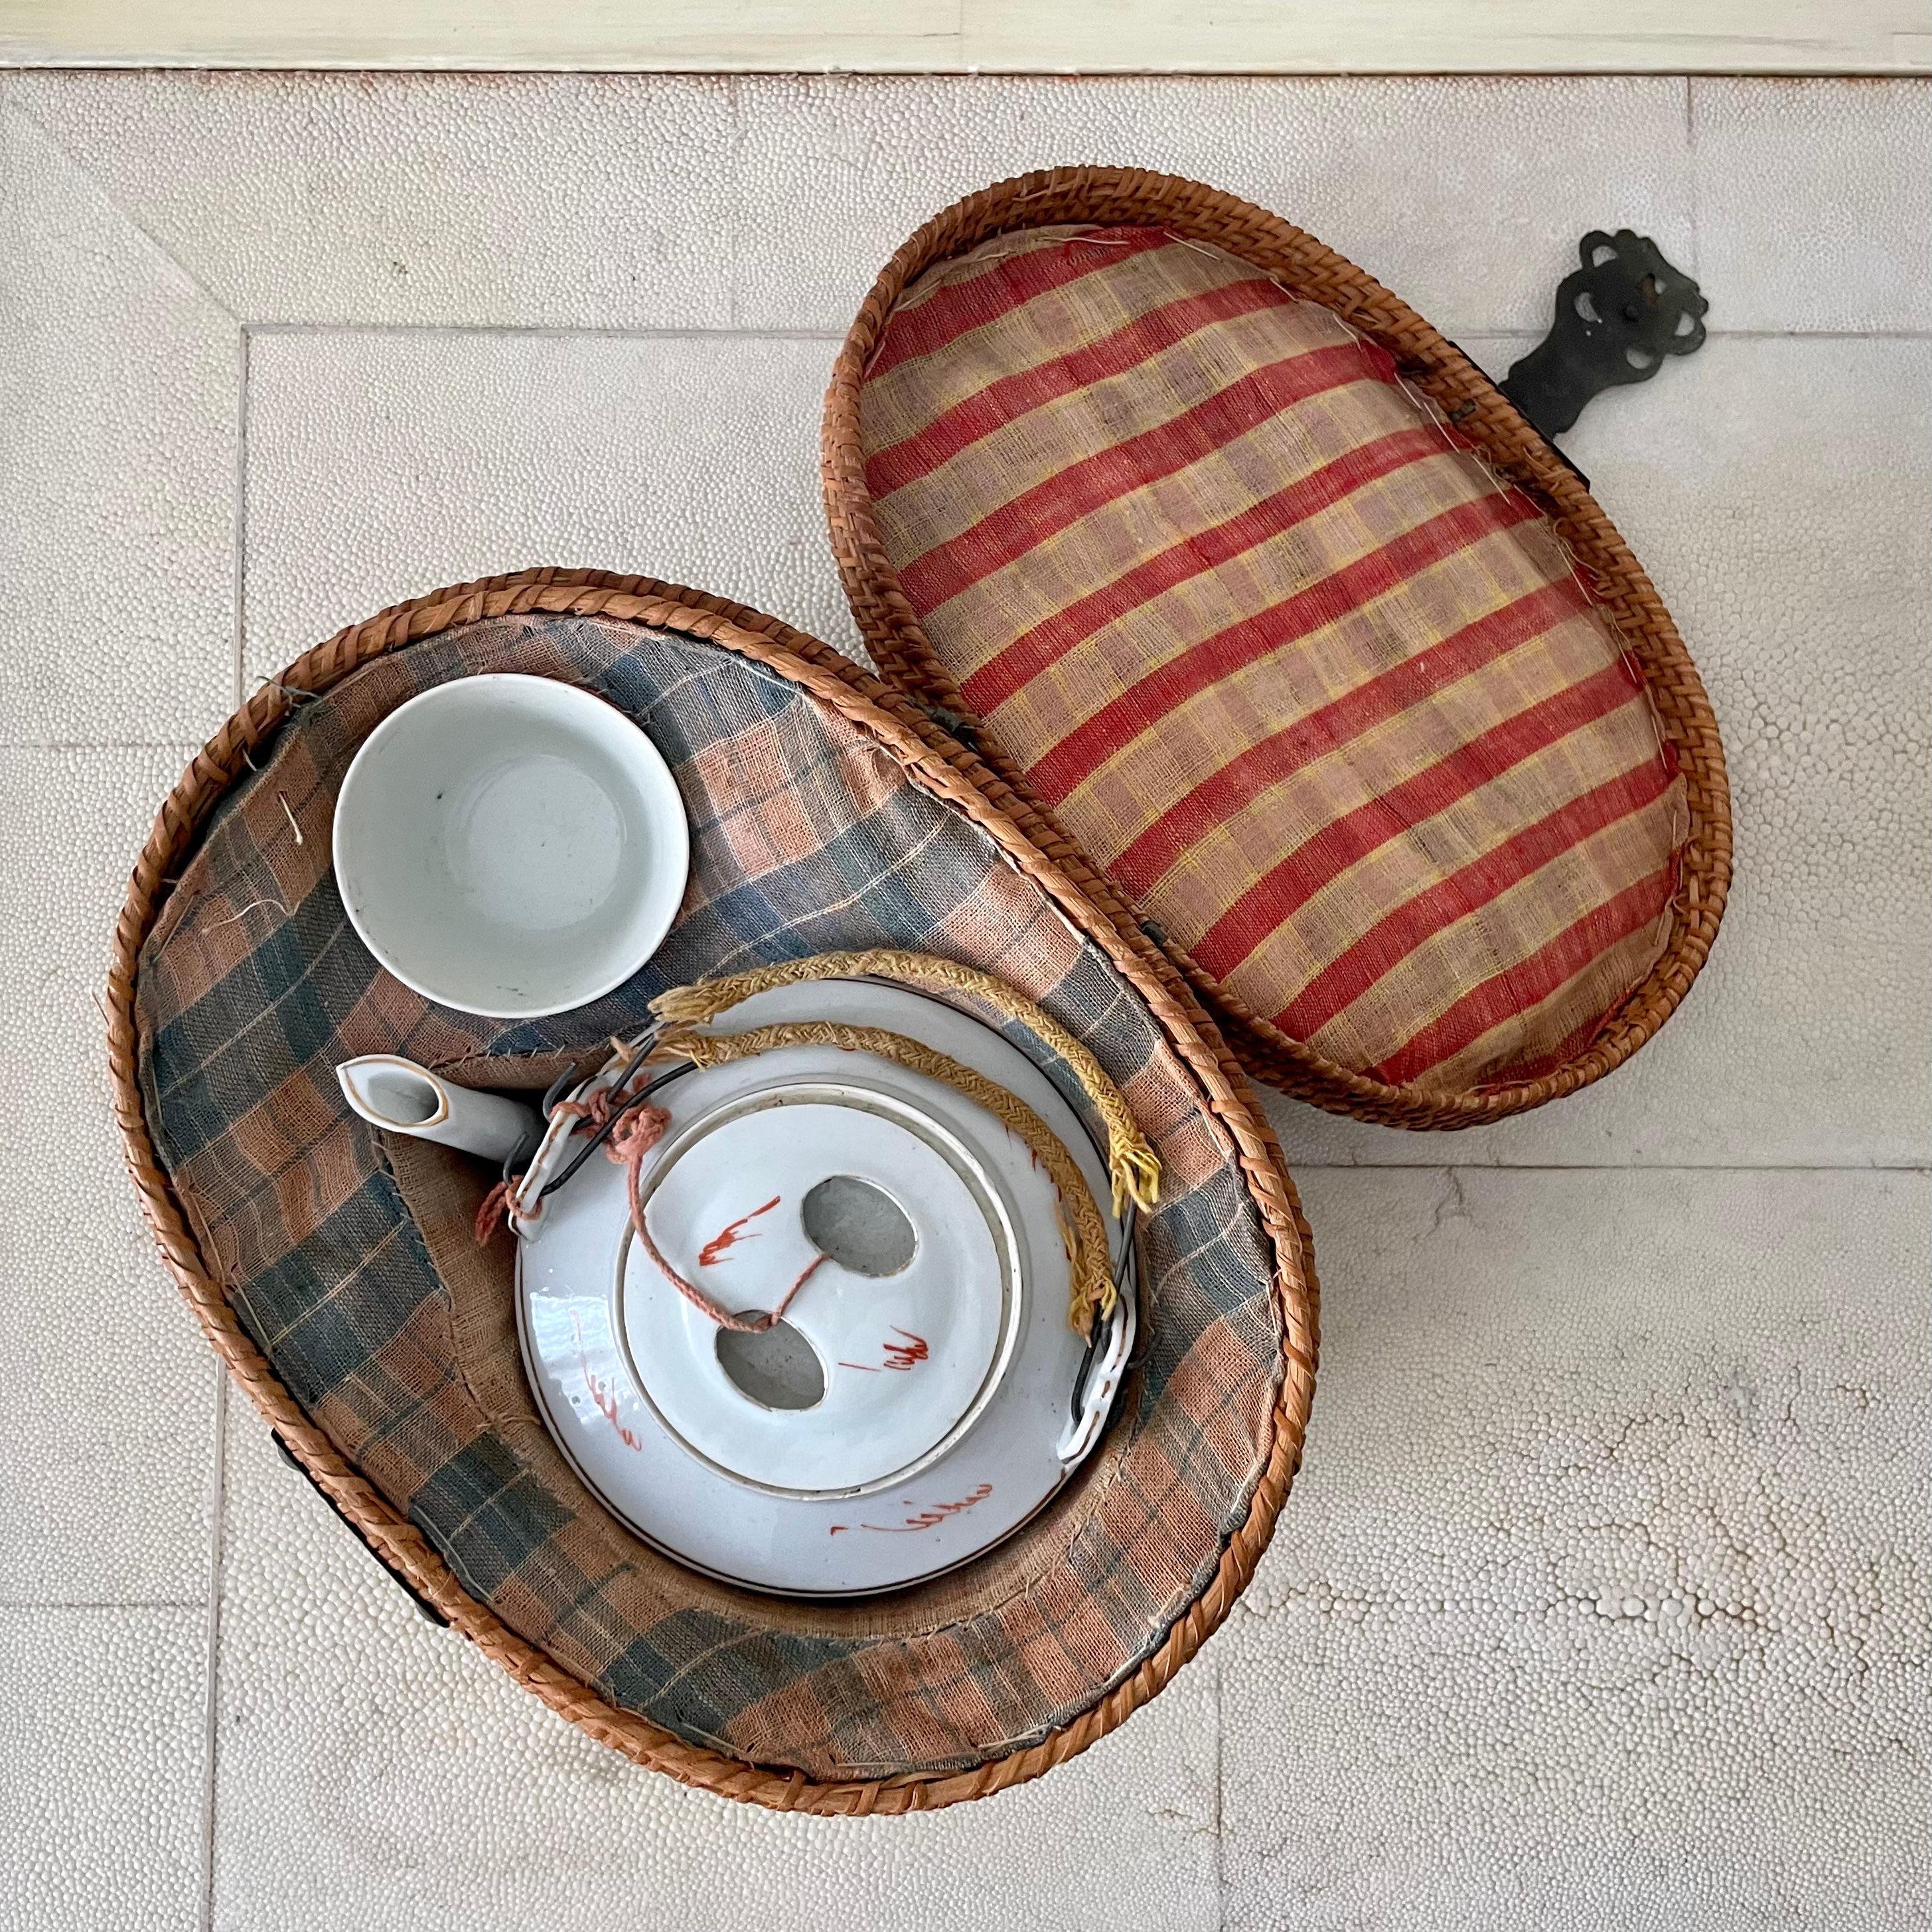 Chinese Export Asian Tea Set with Hand Woven Wicker Carrying Warmer Basket, Teapot and Mugs For Sale